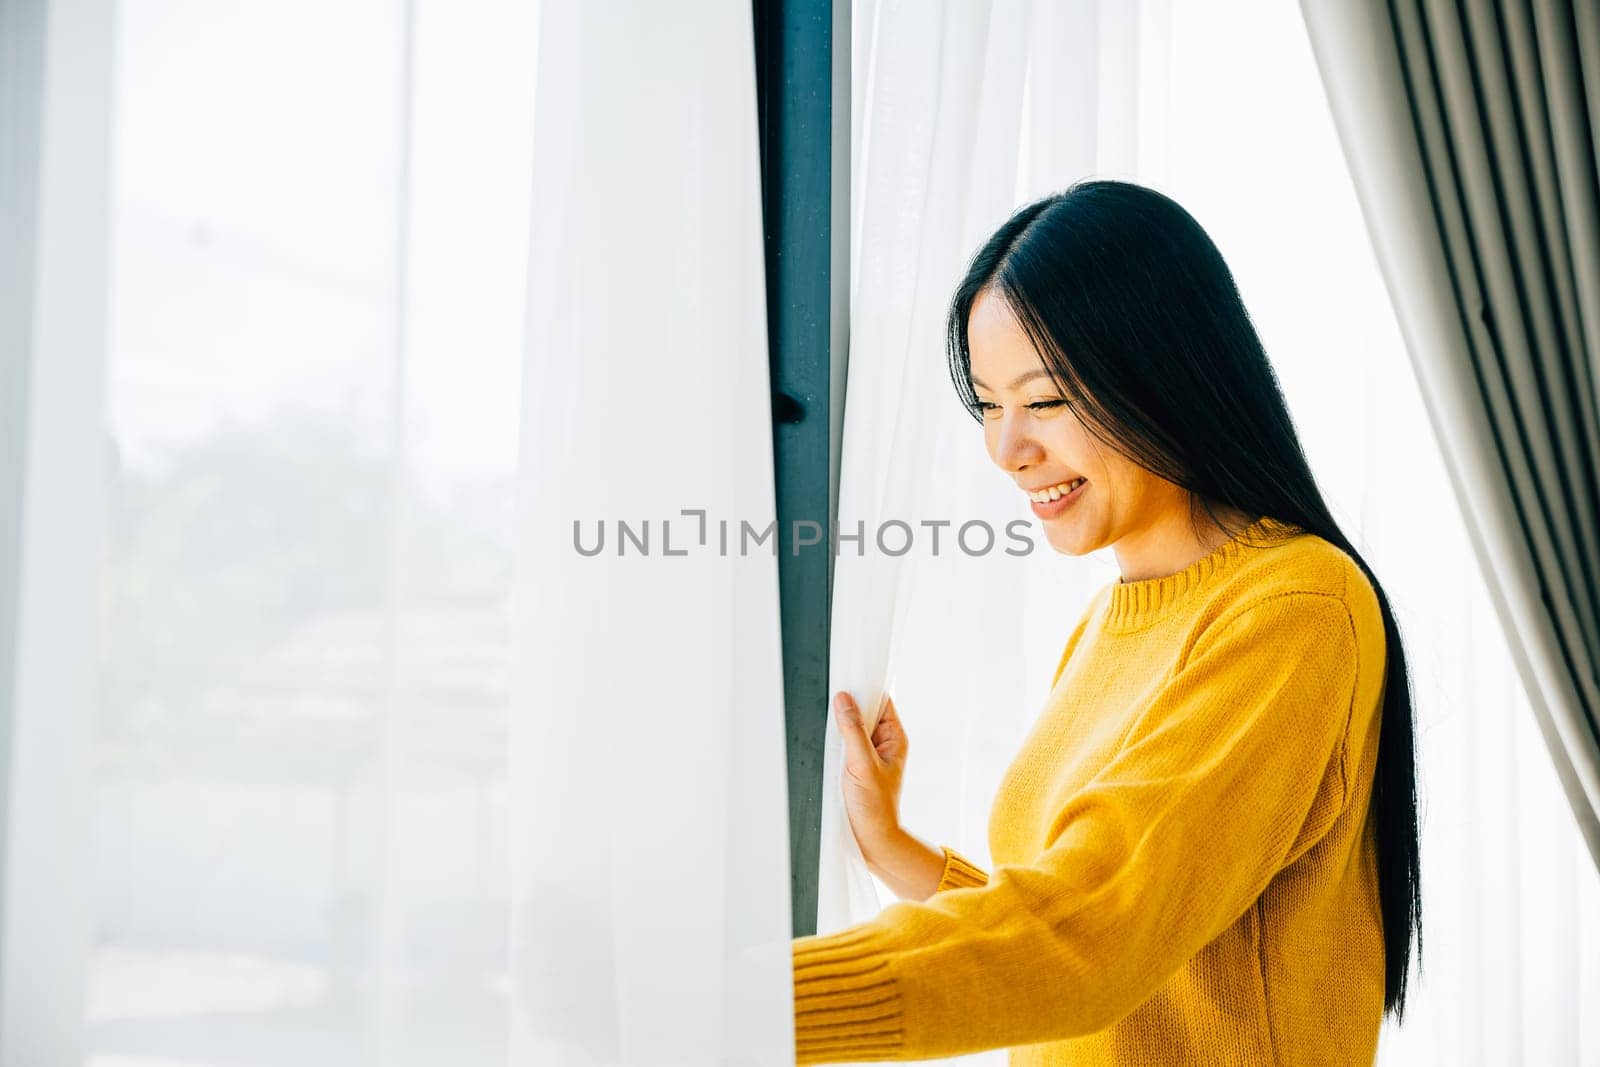 A young woman opens the curtains in the early morning smiles at the pleasant view feeling refreshed and joyful at home. Embracing morning happiness relaxation and a cheerful start.